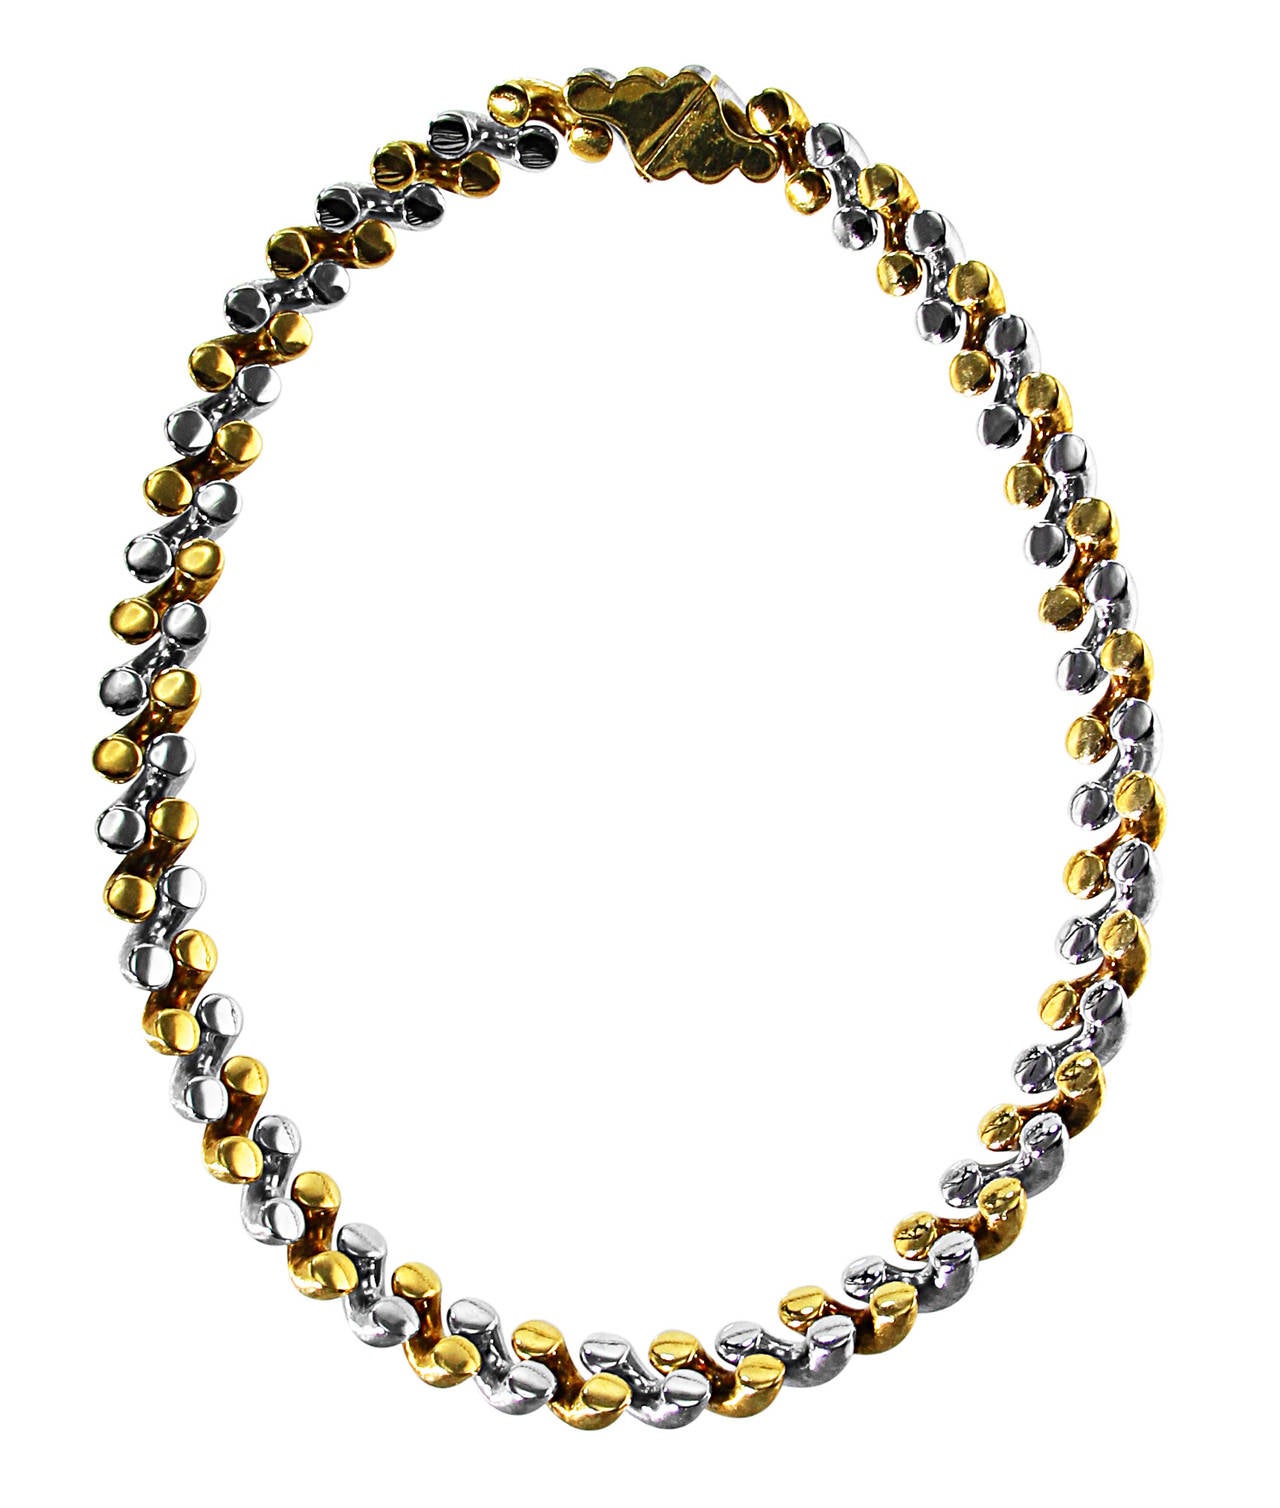 An 18 karat white and yellow gold Torchon Necklace by Buccellati, Italy, designed as diagonal brushed gold links of alternating white and yellow gold, gross weight 86.4 grams, length 16 inches, width 1/2 inch, signed M. Buccellati, Italy. This